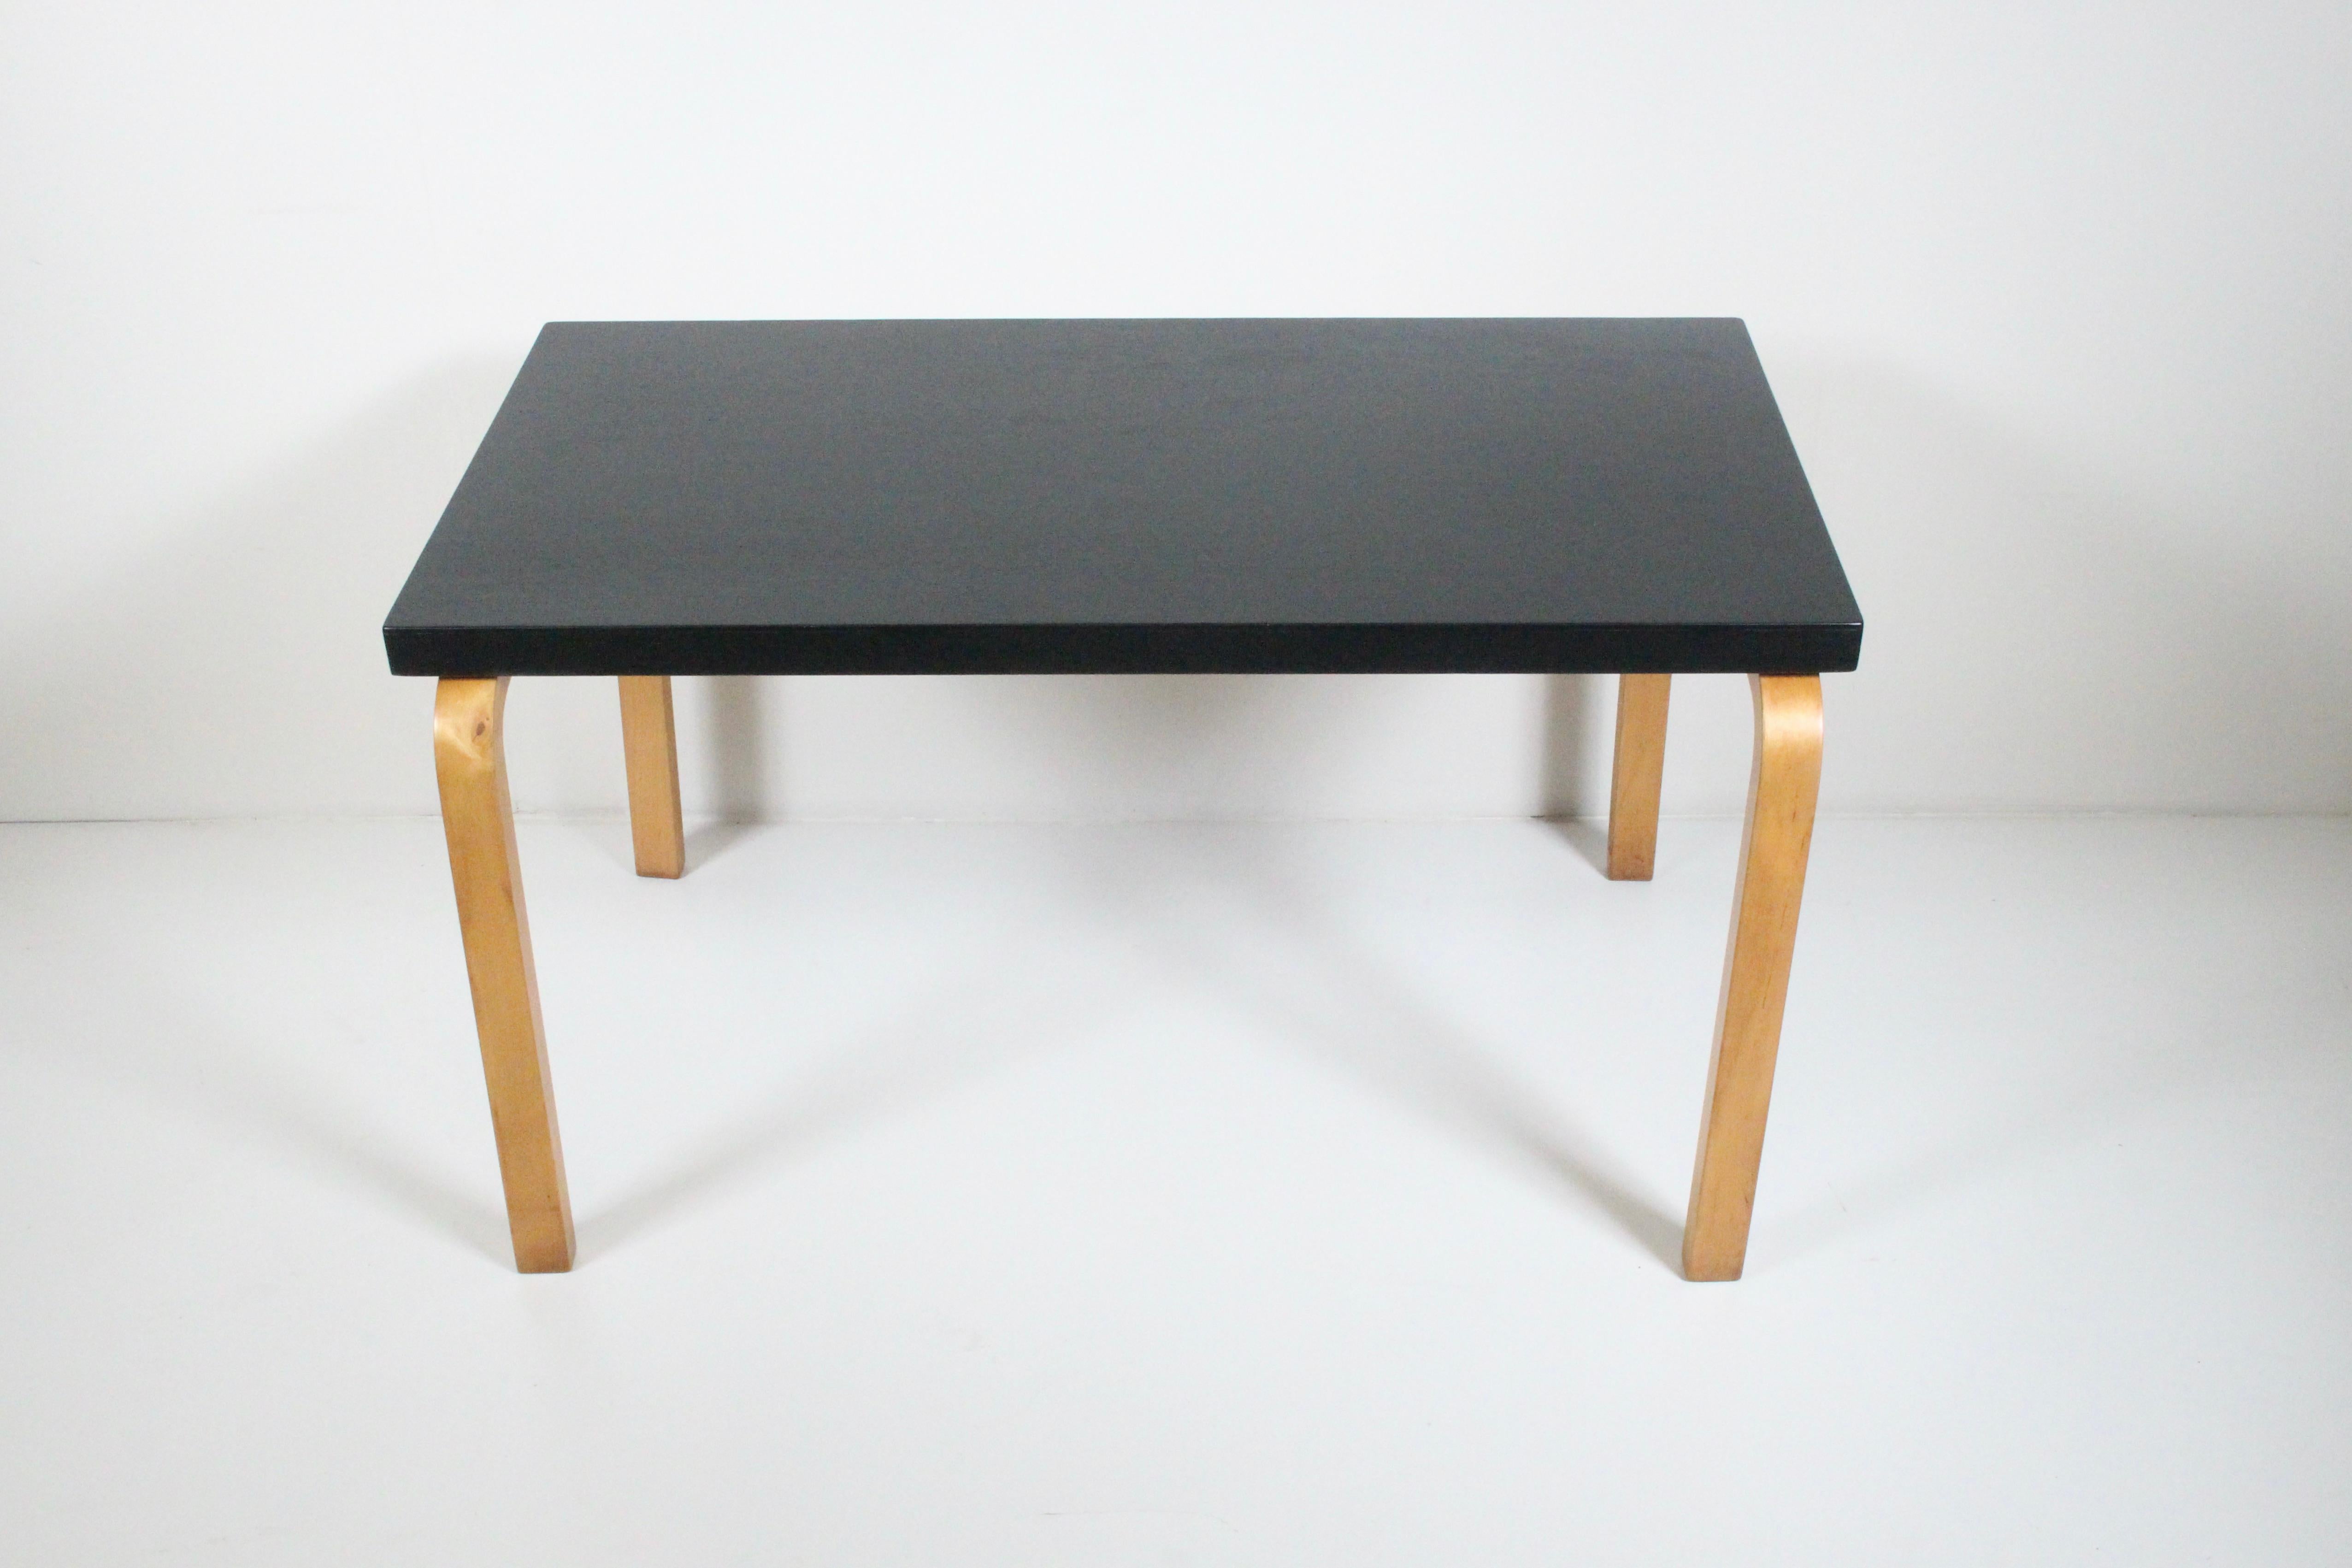 Early Alvar Aalto for Finsven Inc. Side Table, End Table, Coffee Table, Circa 1940. Featuring a rectangular form, newly relacquered Black surface, multi layered Birch bentwood legs, with 7.5